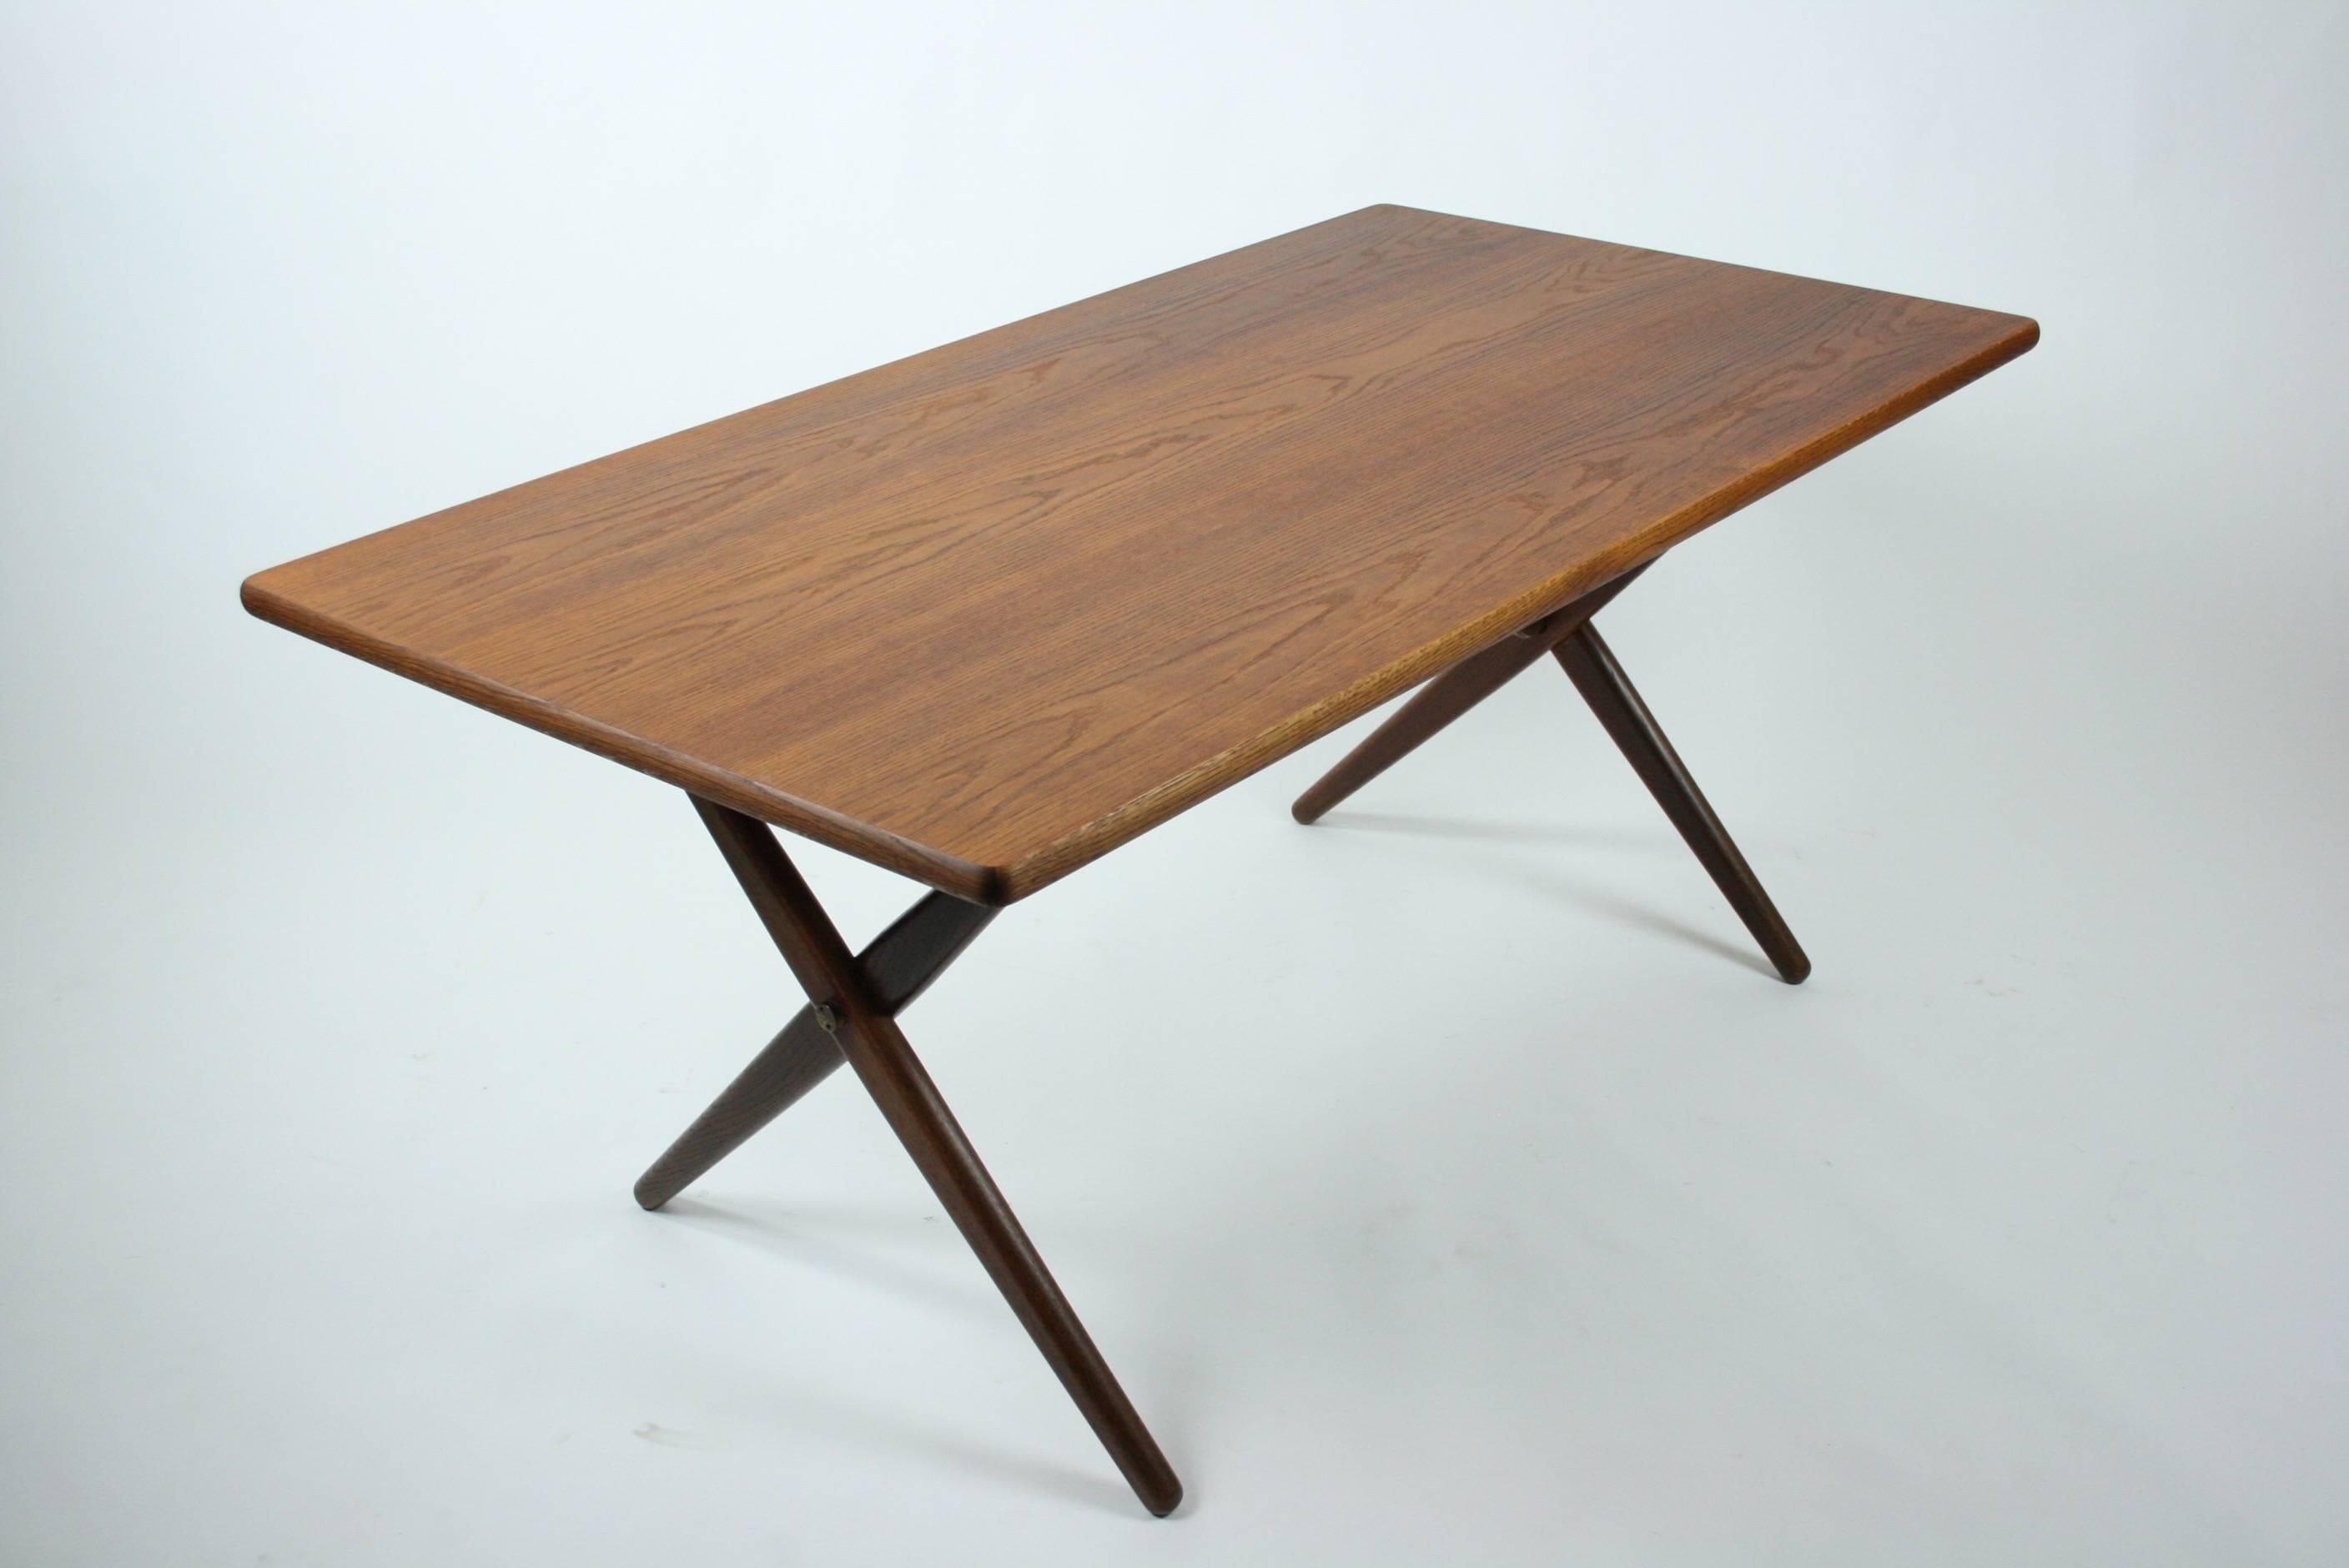 Rare Wegner design produced by Andreas Tuck / Denmark. 

The table legs are made of solid teak and supported by two brass X-brackets. The tabletop is also teak. The tabletop and legs have been restored.